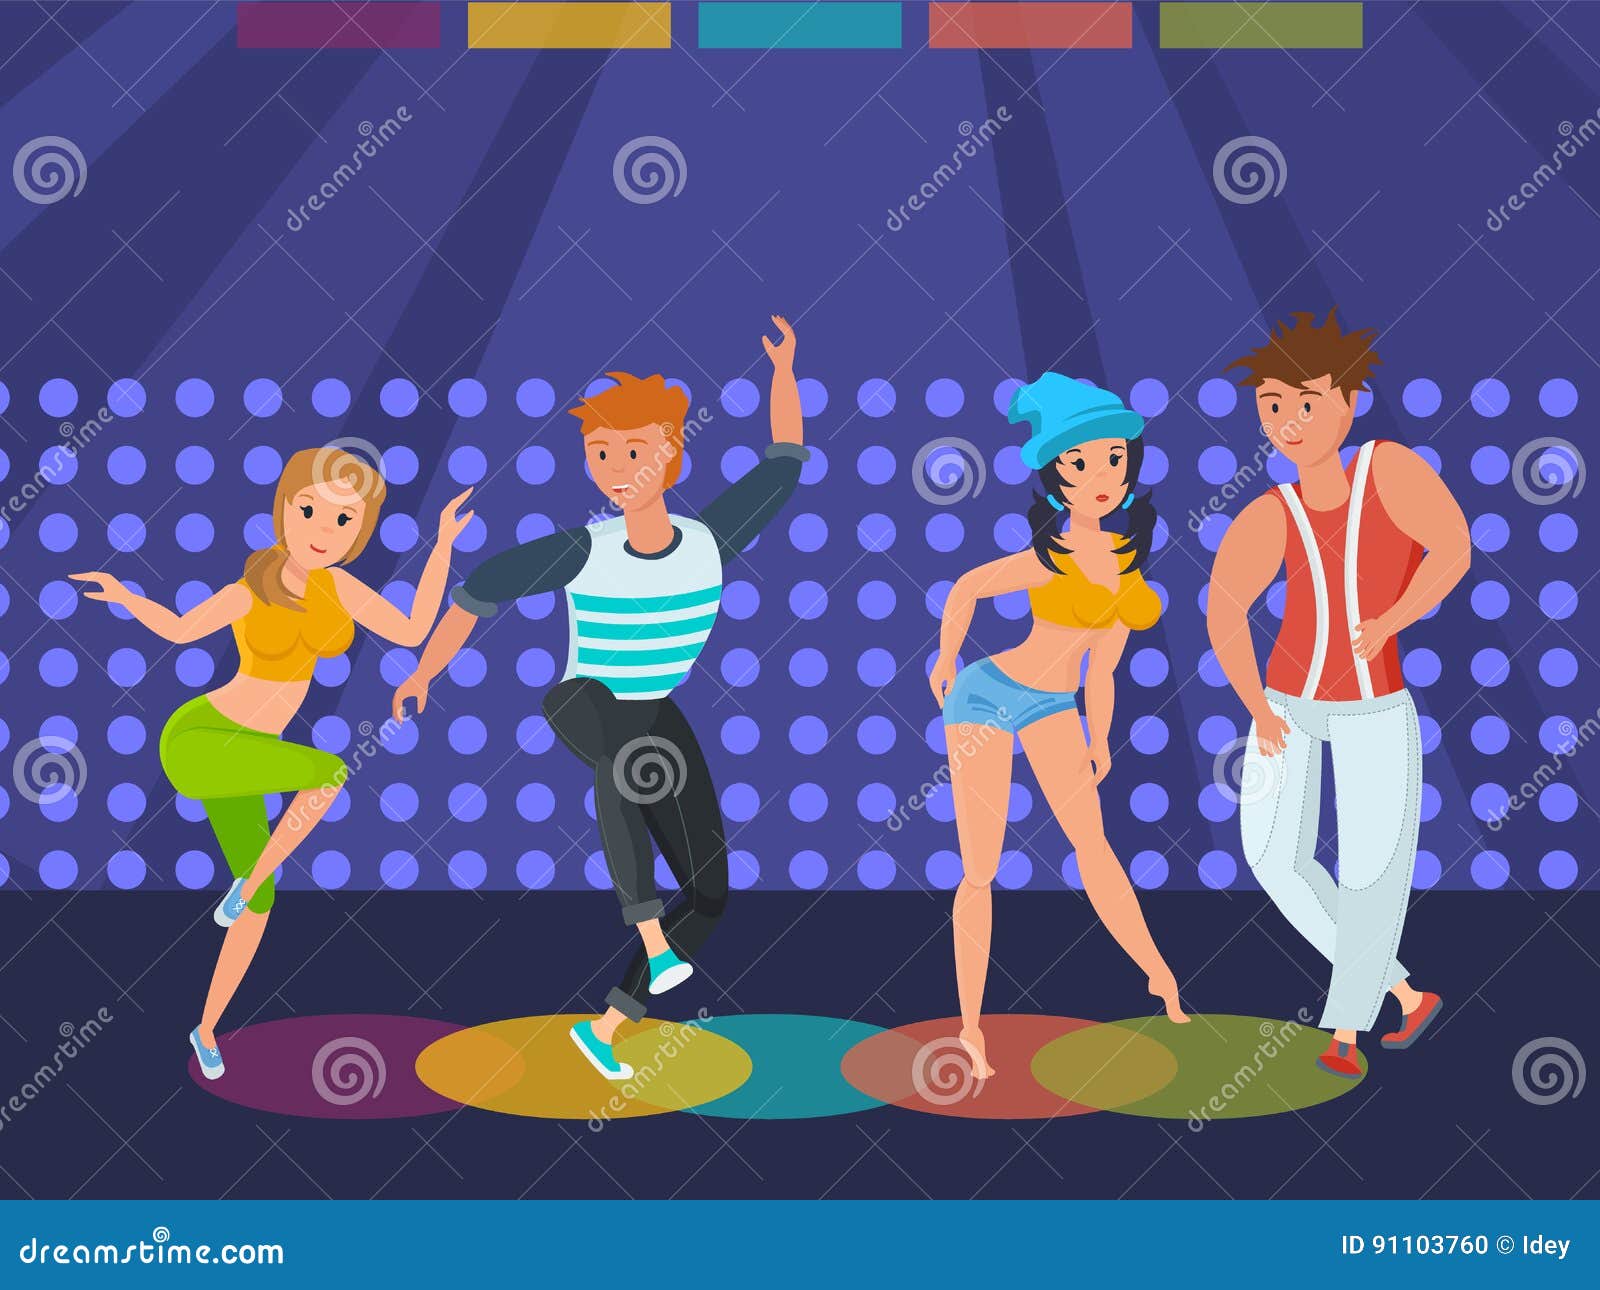 People Relax At Disco, Dance Modern Moves On Dance Floor. Stock Vector Illustration of